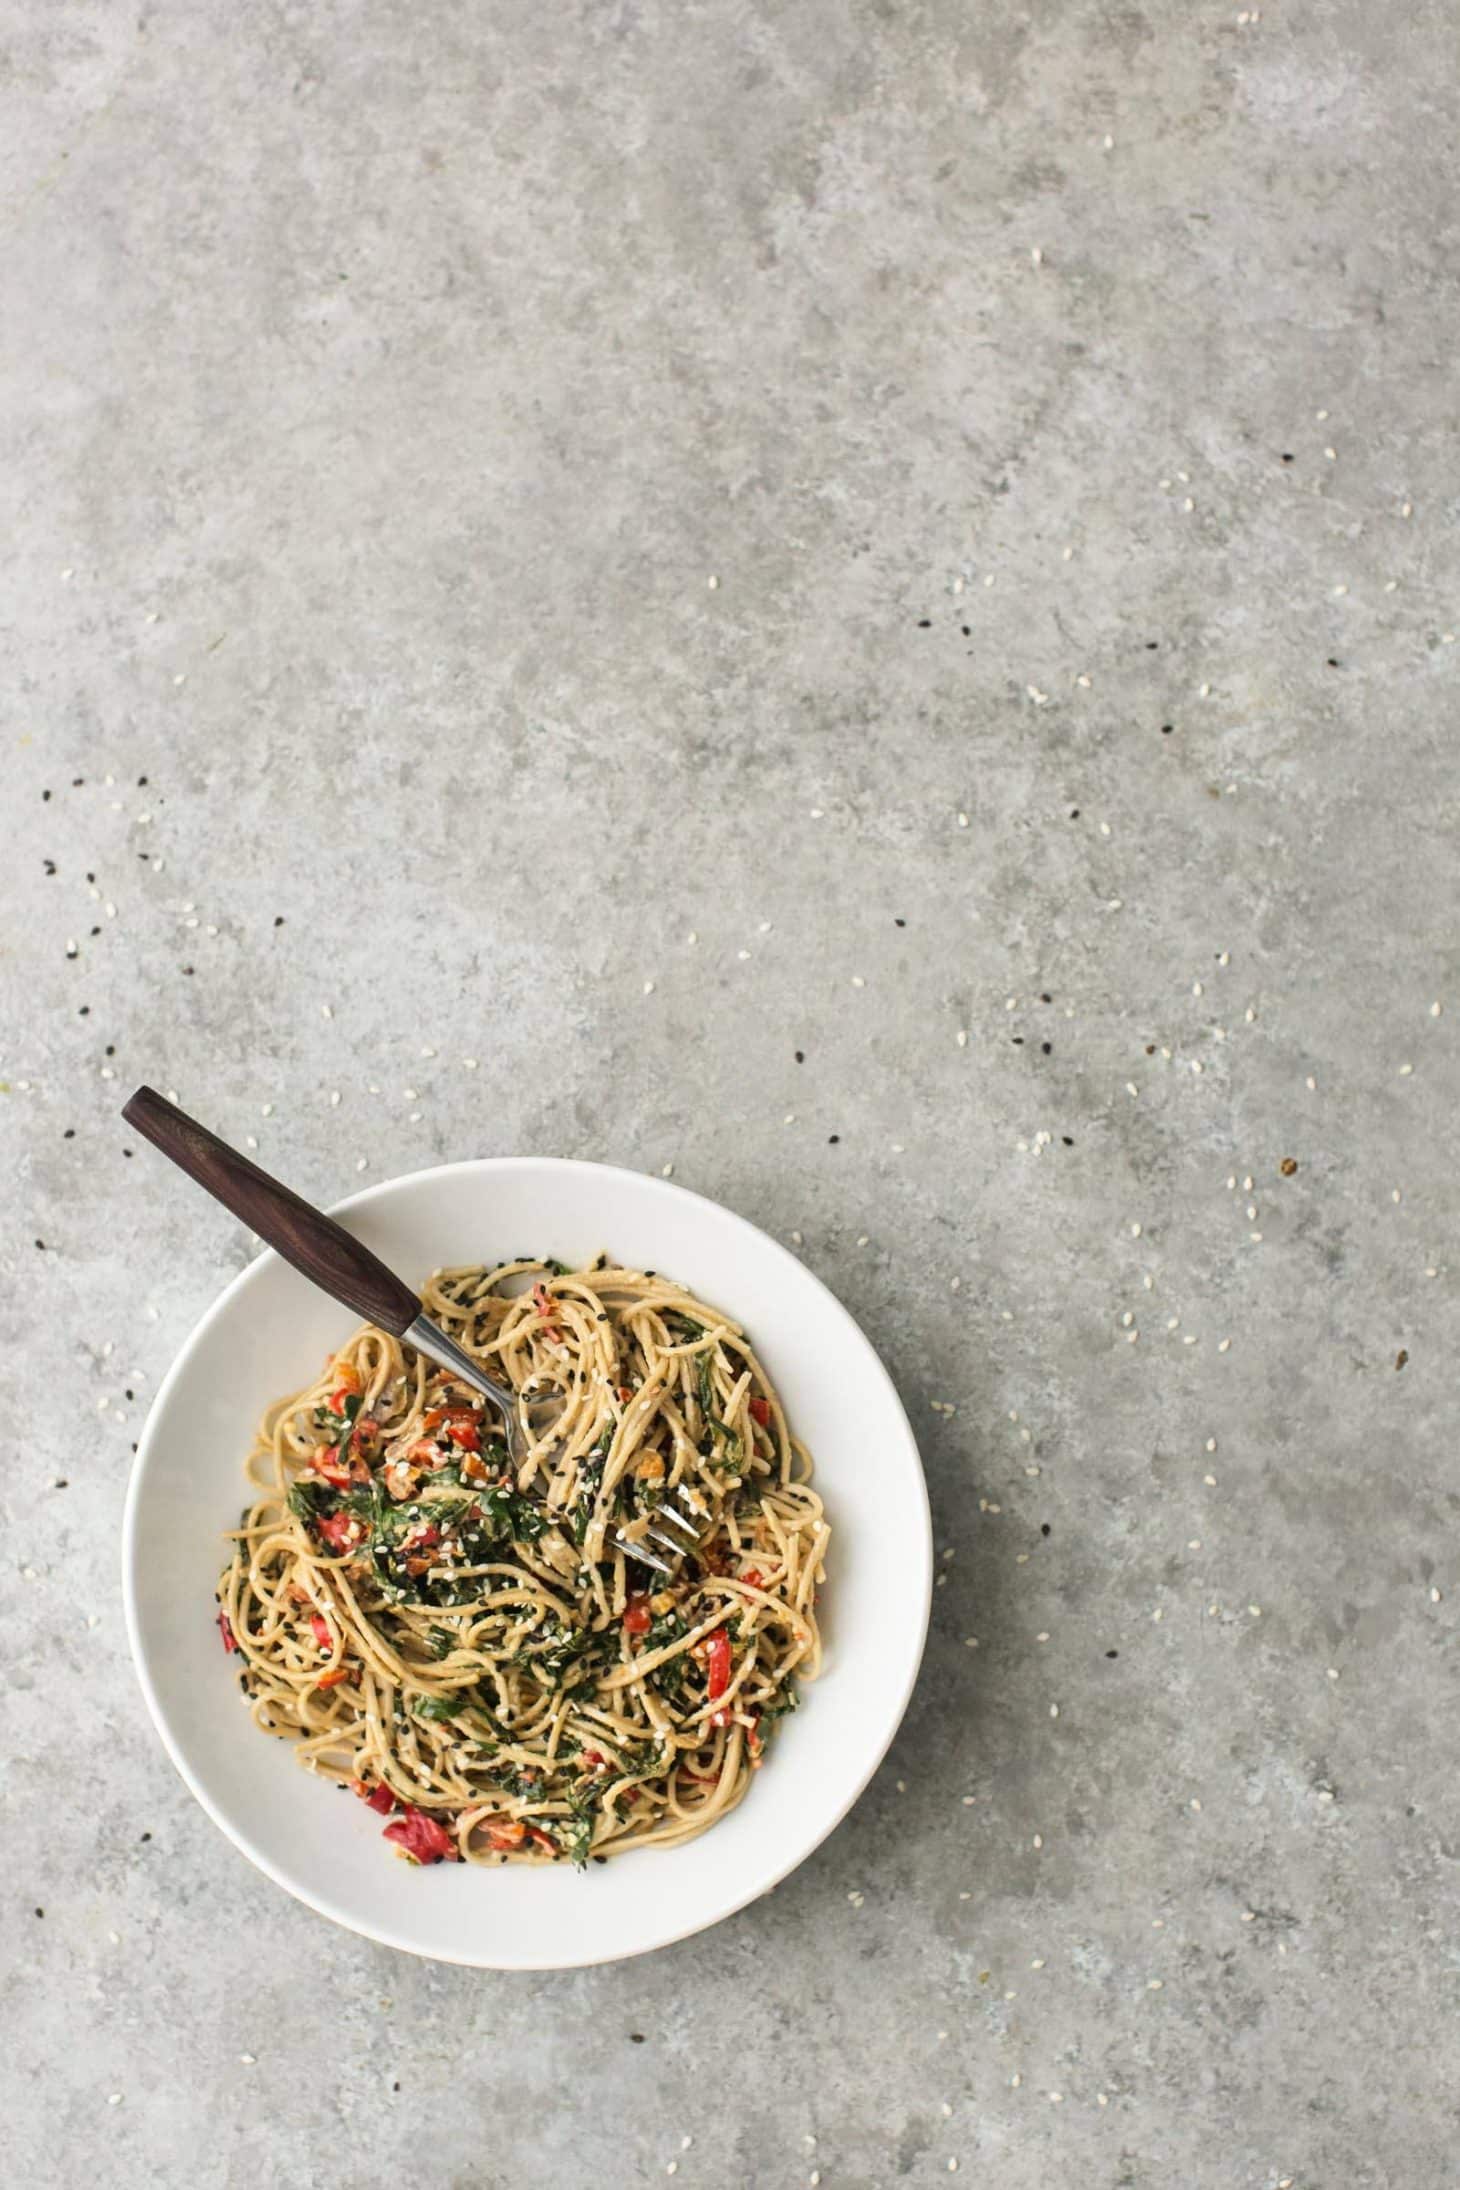 Tahini Noodle Bowl with Collards and Red Peppers | @naturallyella